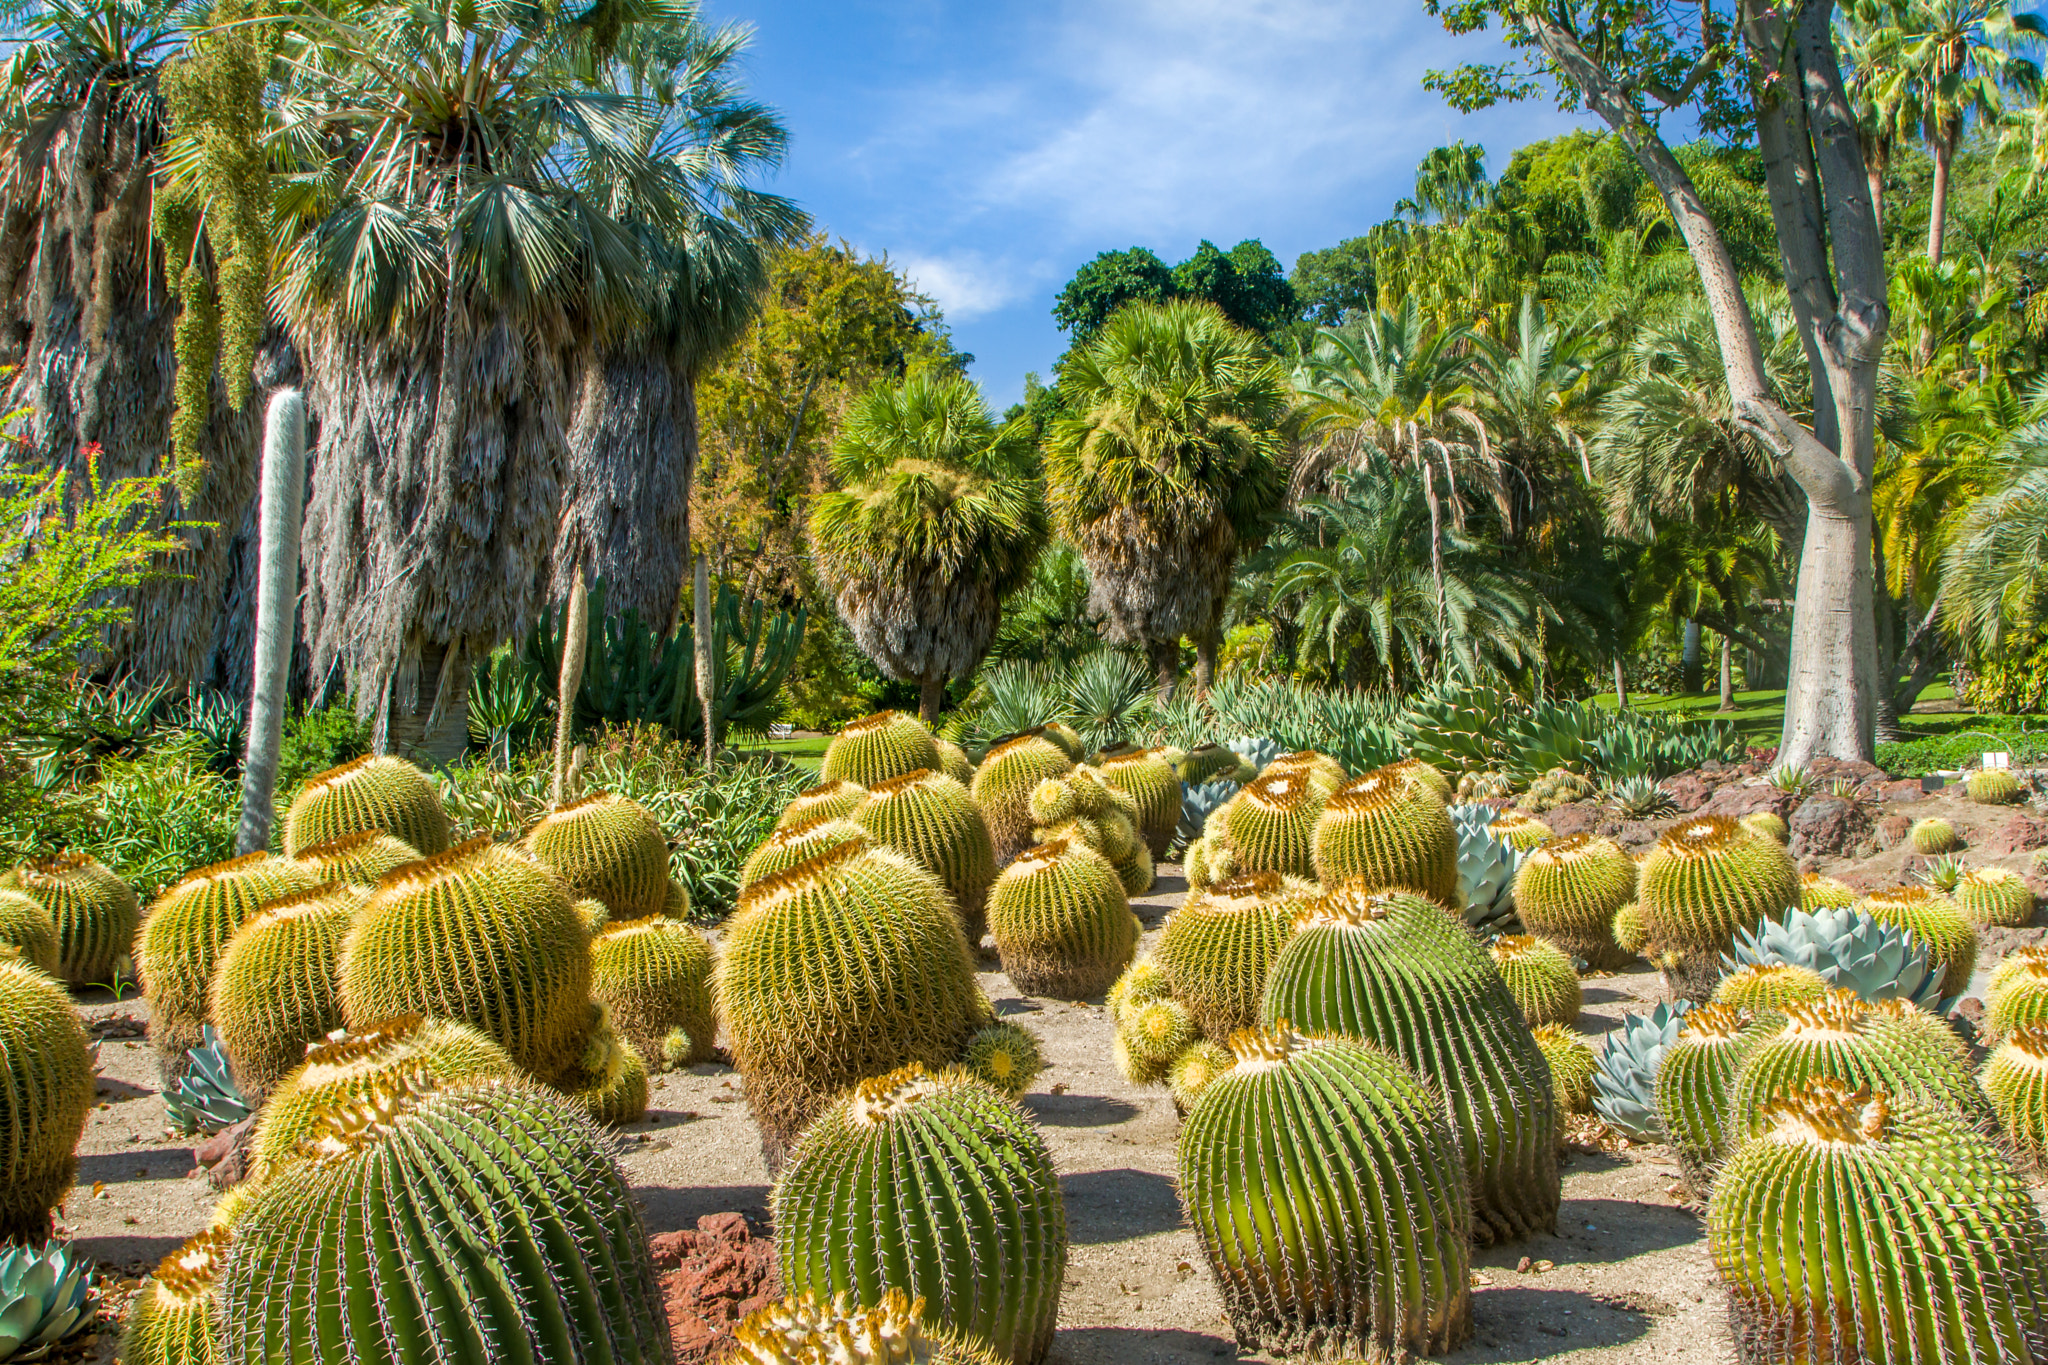 Sony a6300 + Canon EF 24-105mm F4L IS USM sample photo. Grouping of barrel cactus in tropical garden photography